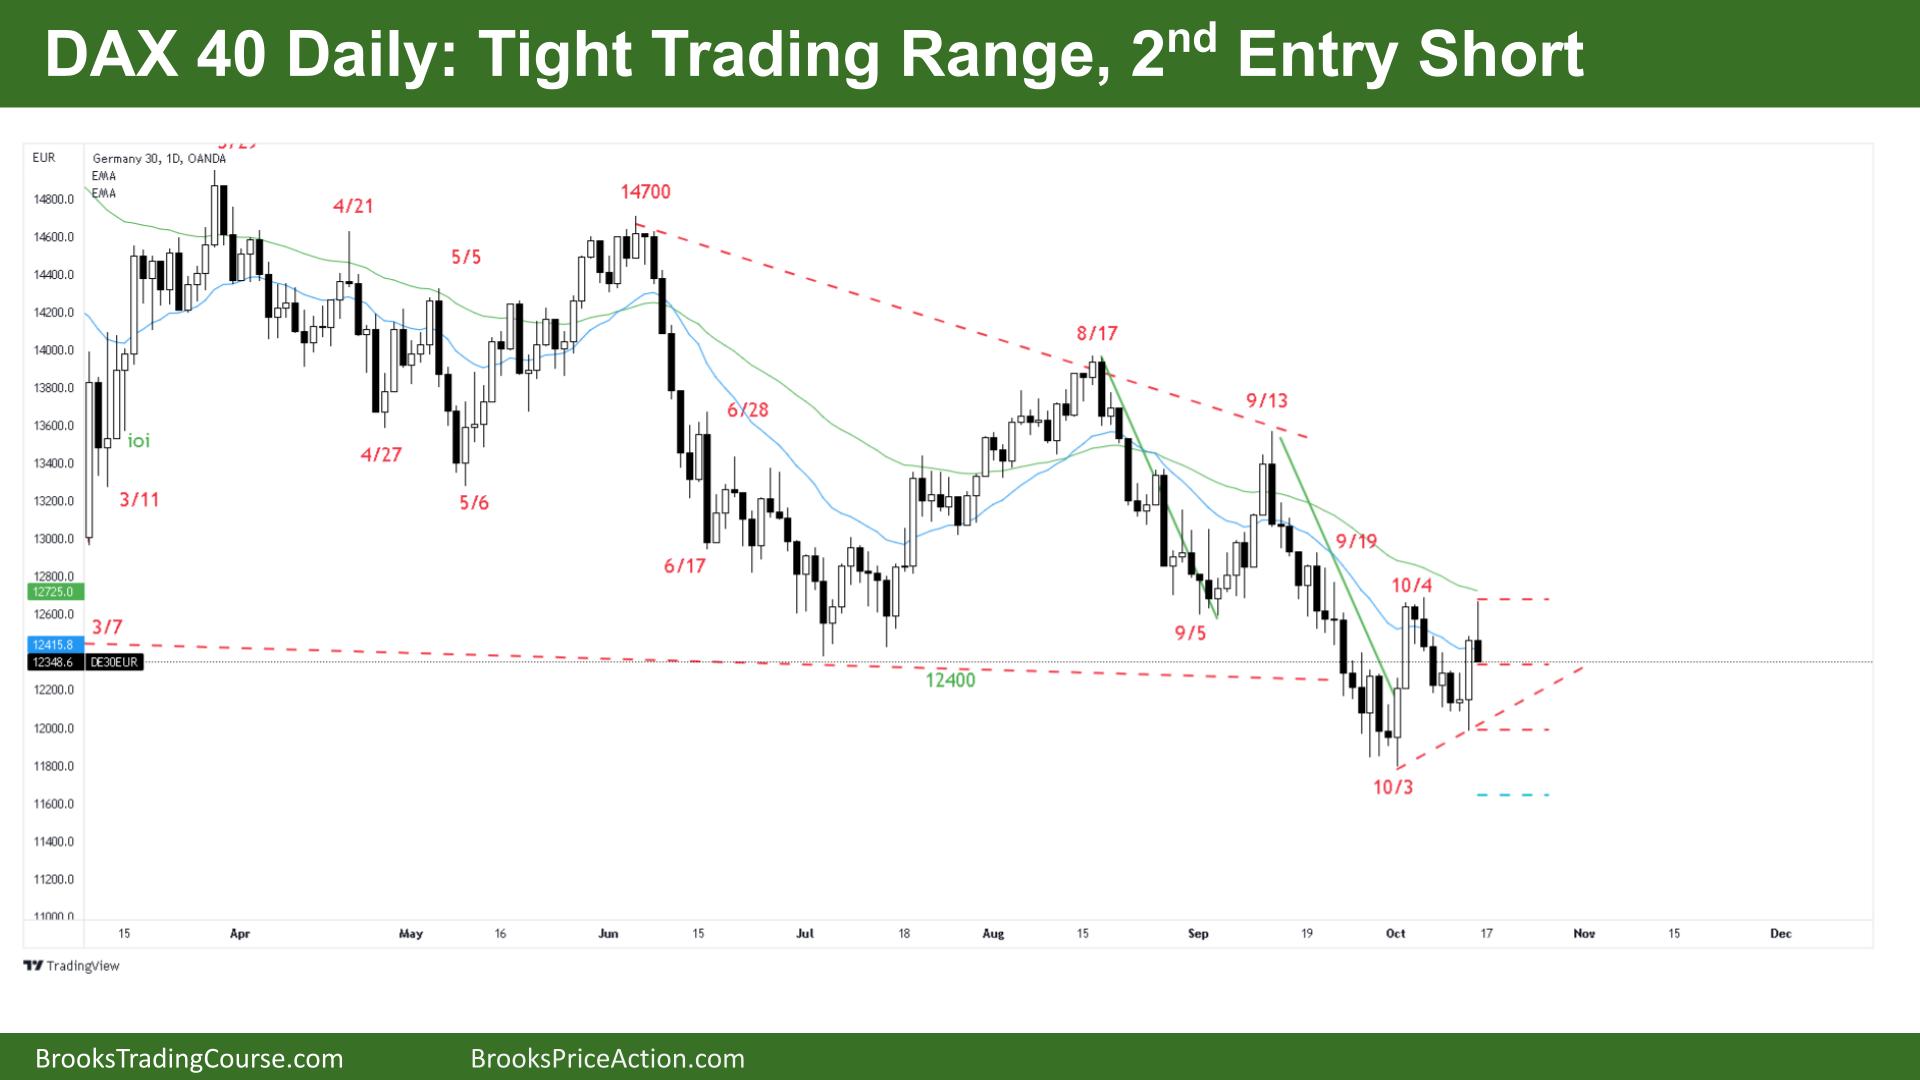 DAX 40 Daily Tight Trading Range, 2nd Entry Short